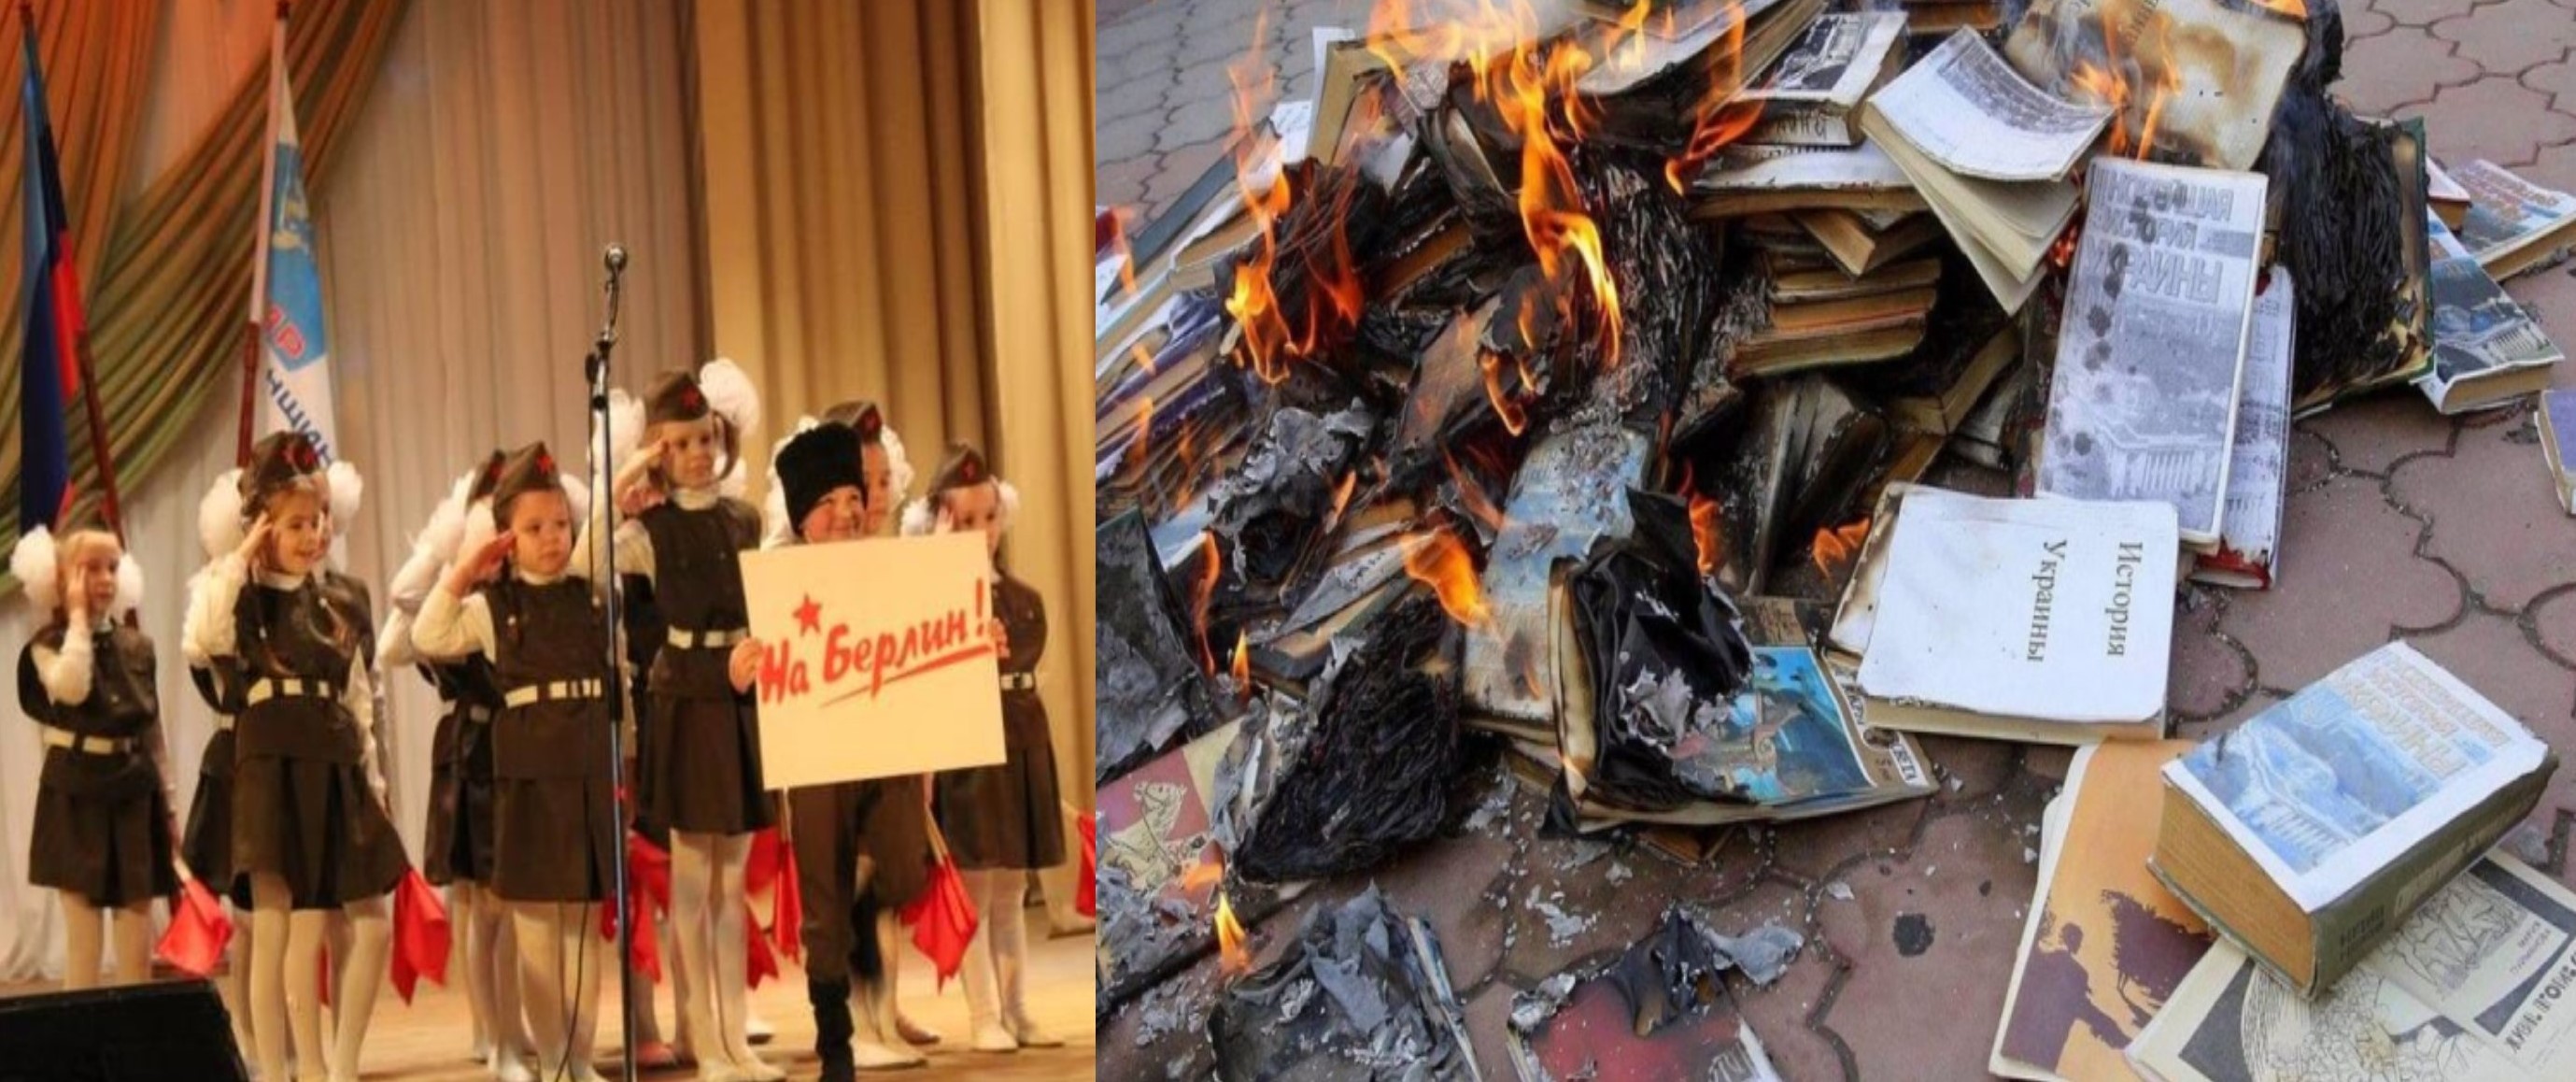 Propaganda event in occupied Luhansk, 23.02.2022, burning books, image on many sites, but cited on one as from censor.net